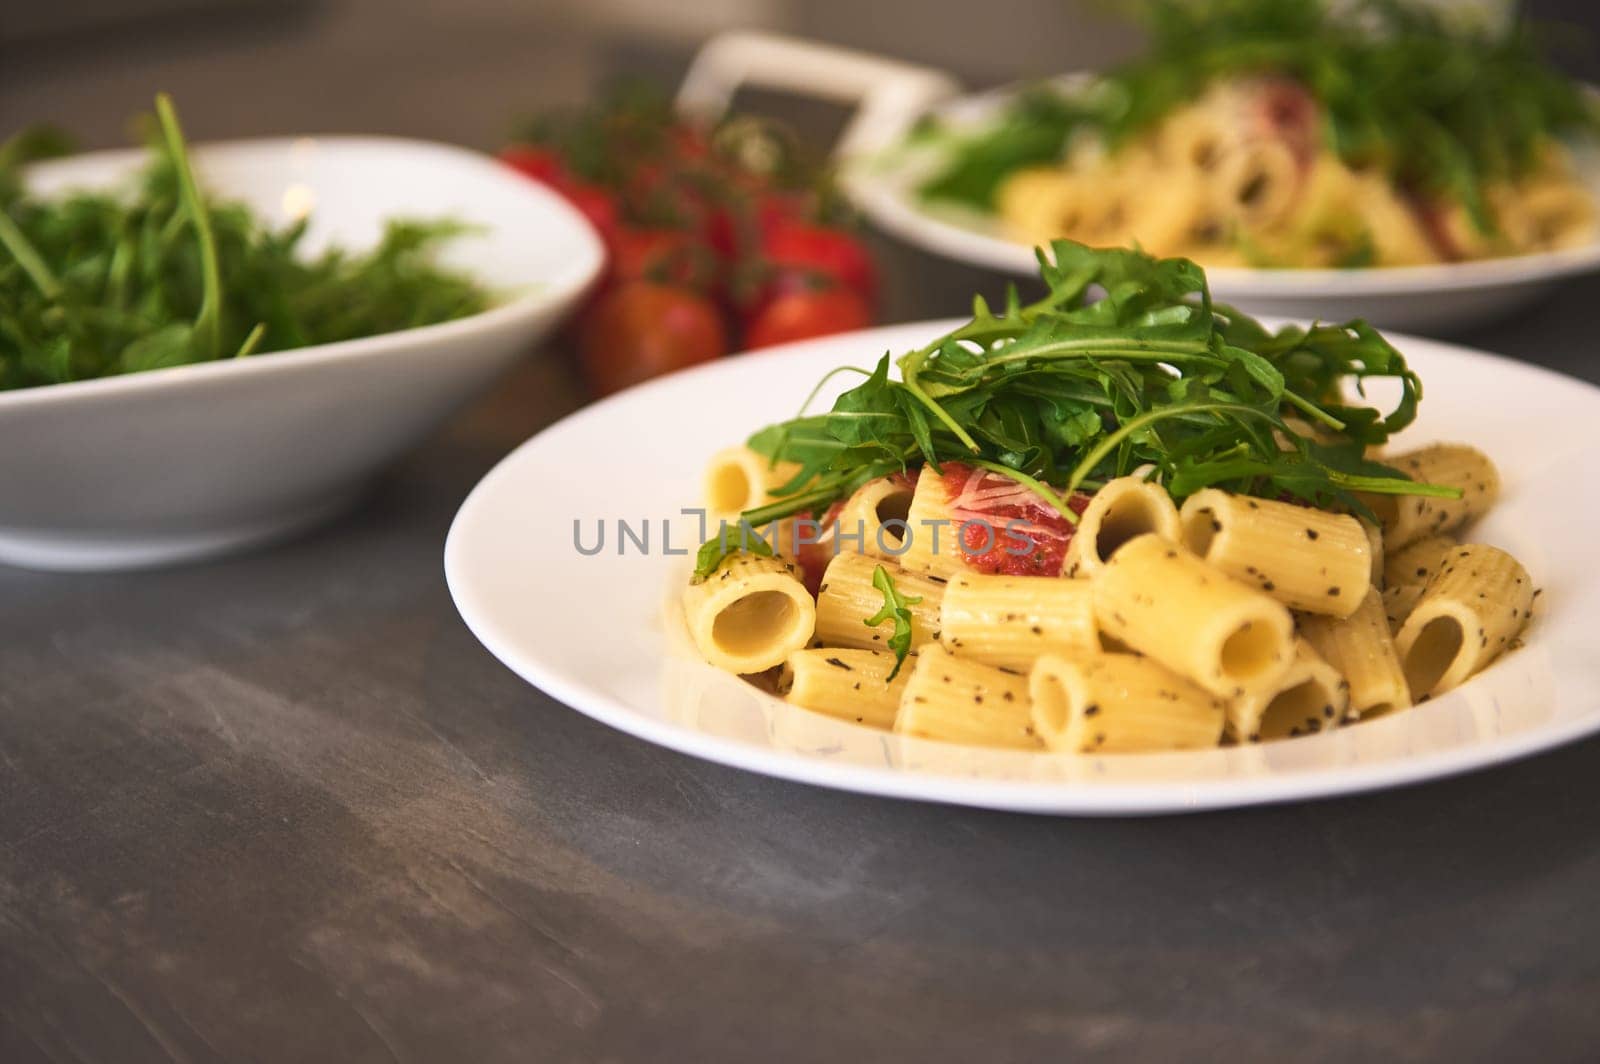 Homemade Italian penne pasta with sauce, tomatoes, arugula, basil and parmesan cheese. Traditional Italian cuisine. Served on a dark table with a branch of organic cherry tomatoes on blurred backdrop